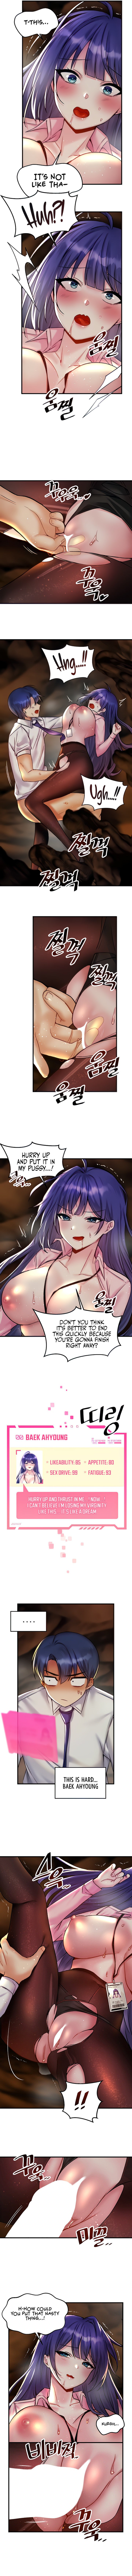 trapped-in-the-academys-eroge-chap-30-2